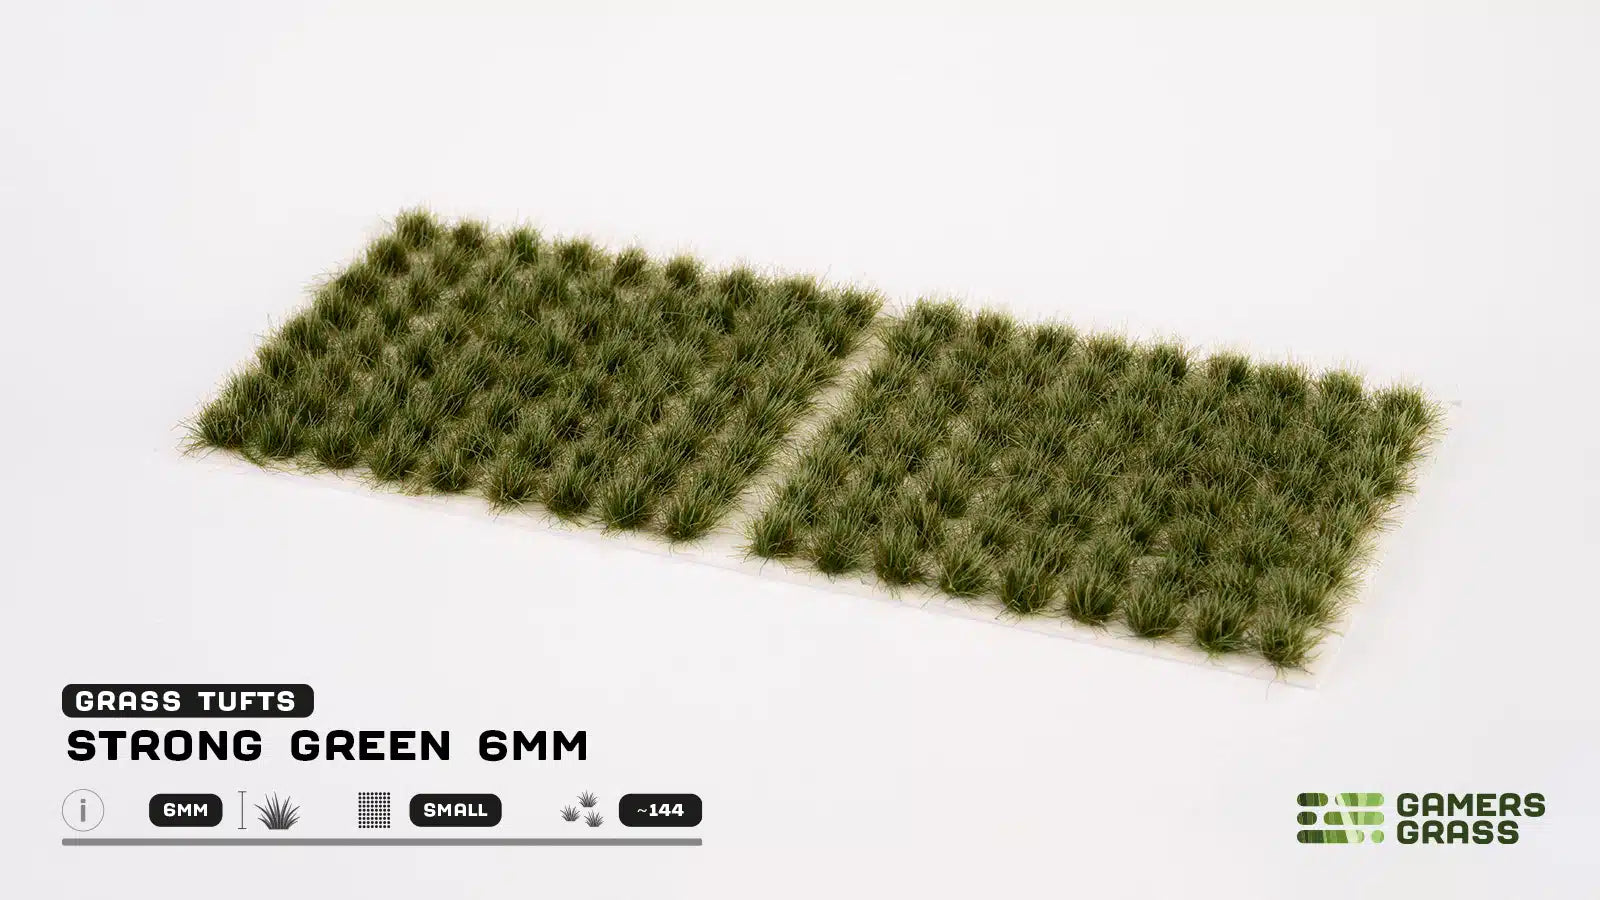 Strong Green 6mm Tufts (Small) - Gamers Grass - 0